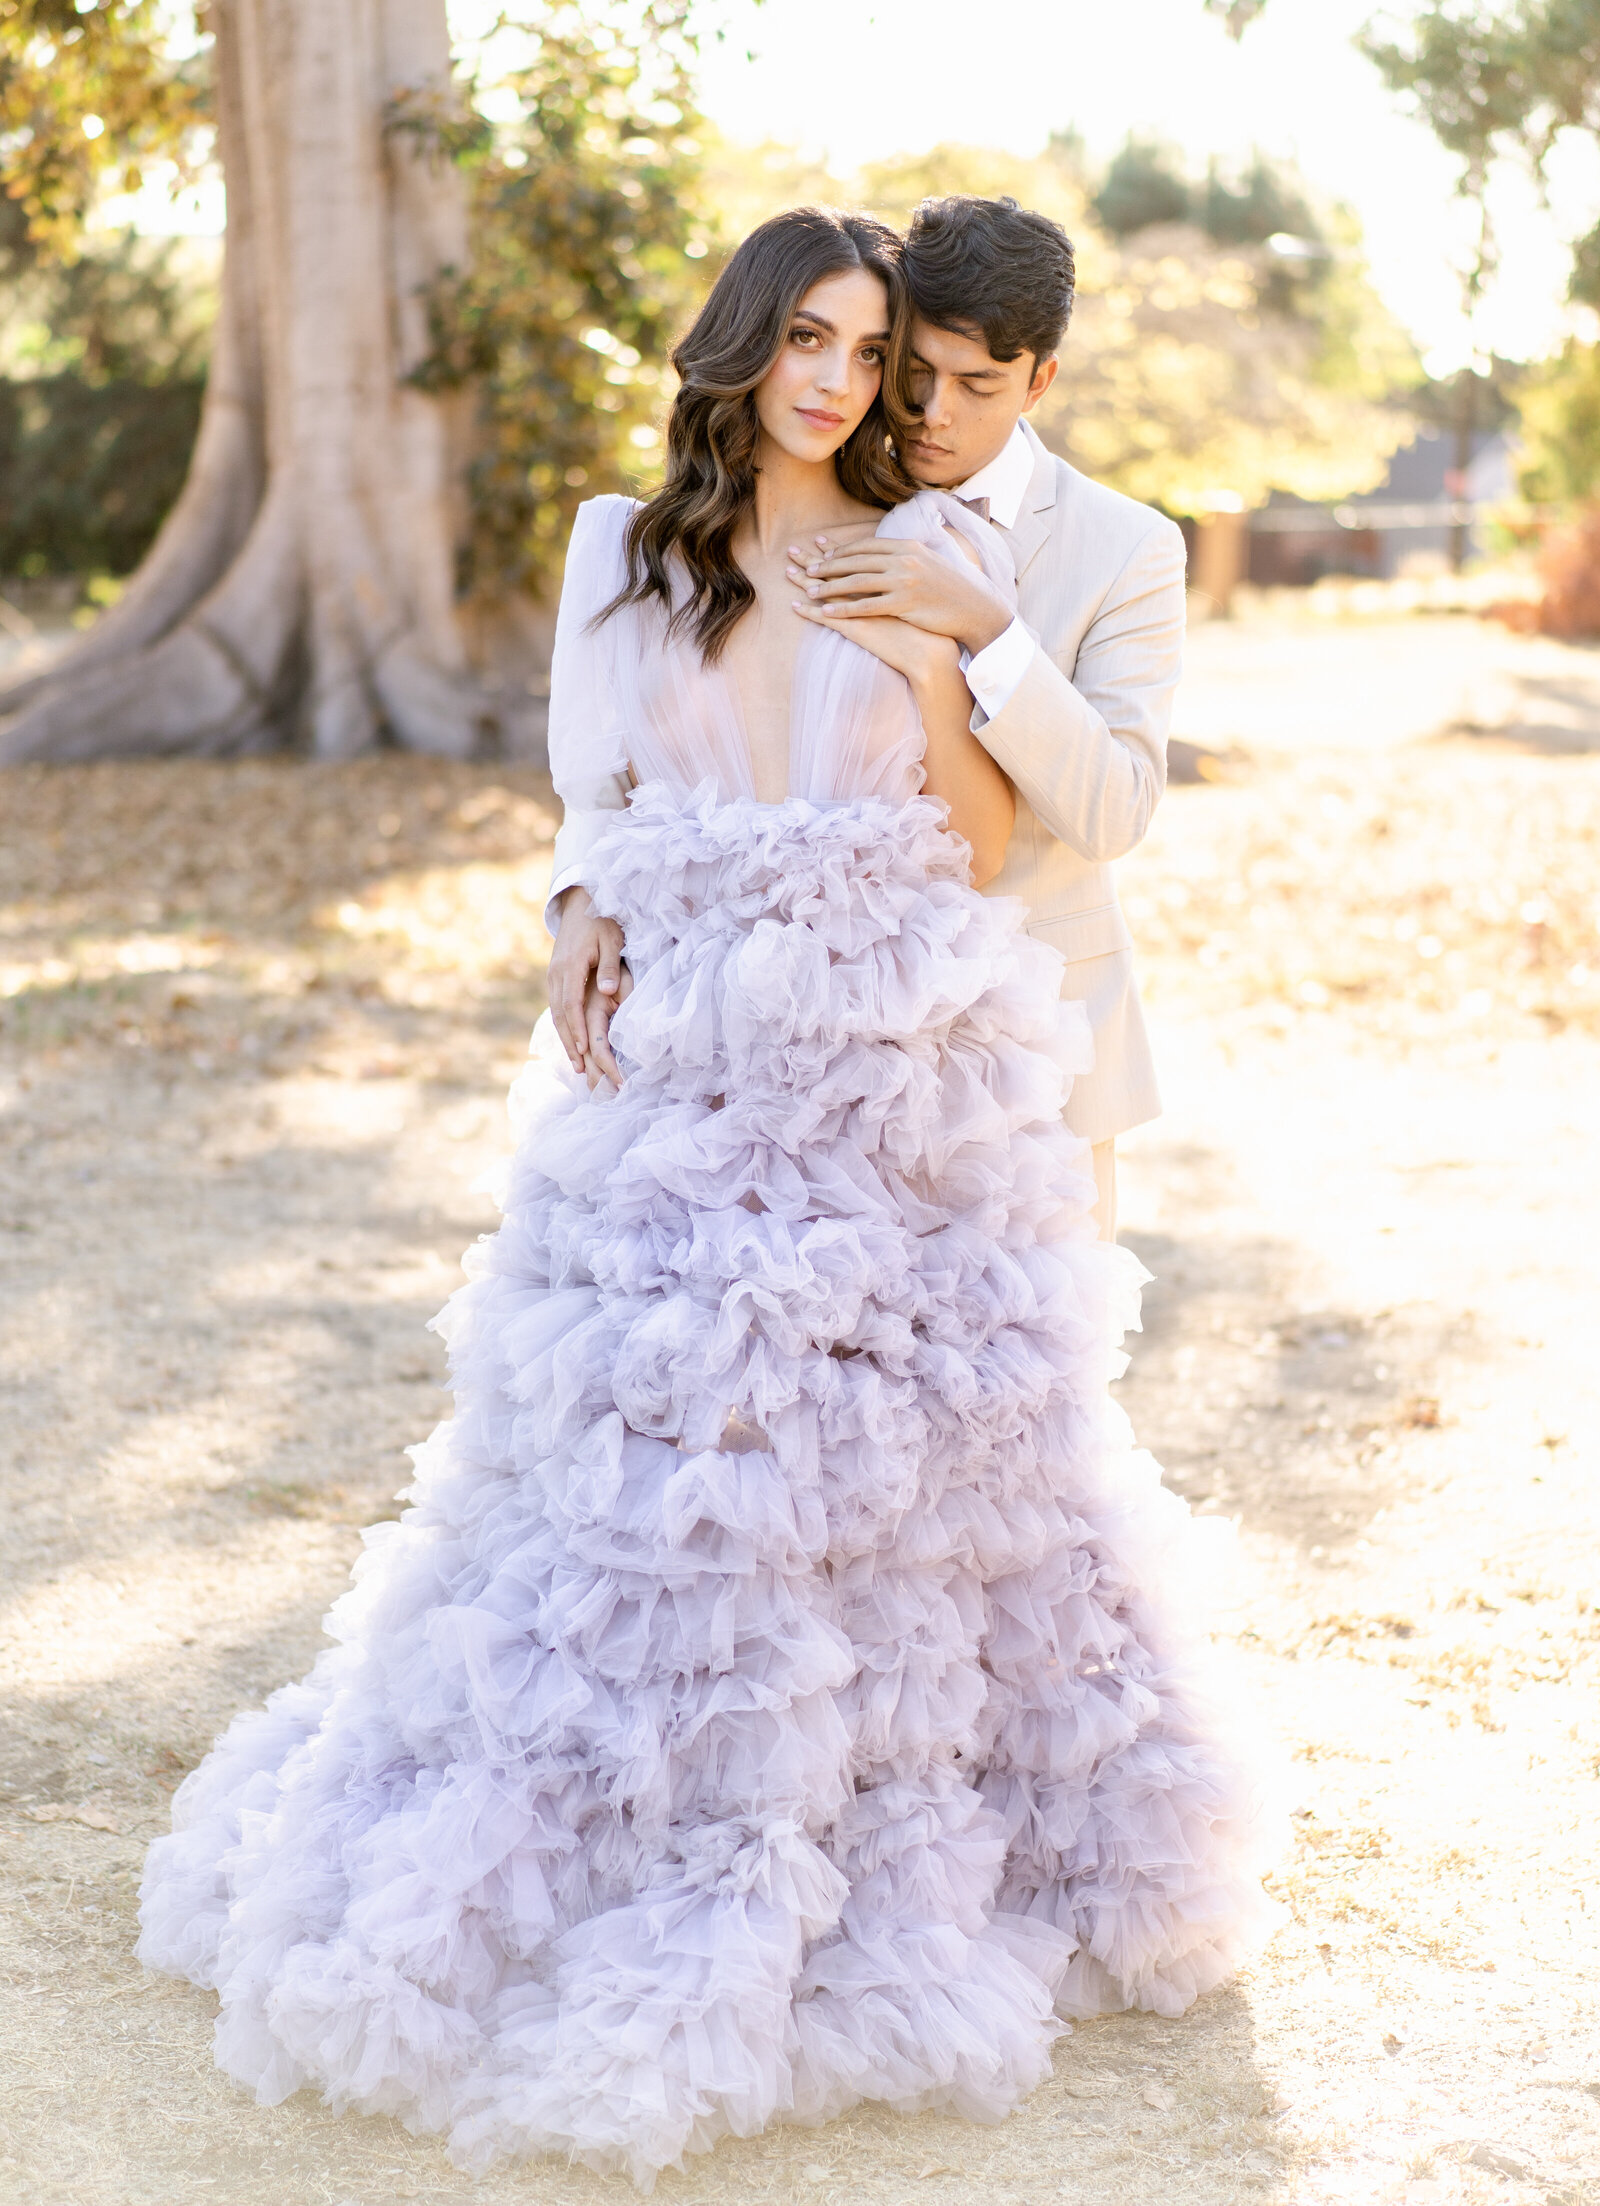 Portrait of bride and groom in a lavender wedding gown and cream suit embracing outdoors with large tree outback.